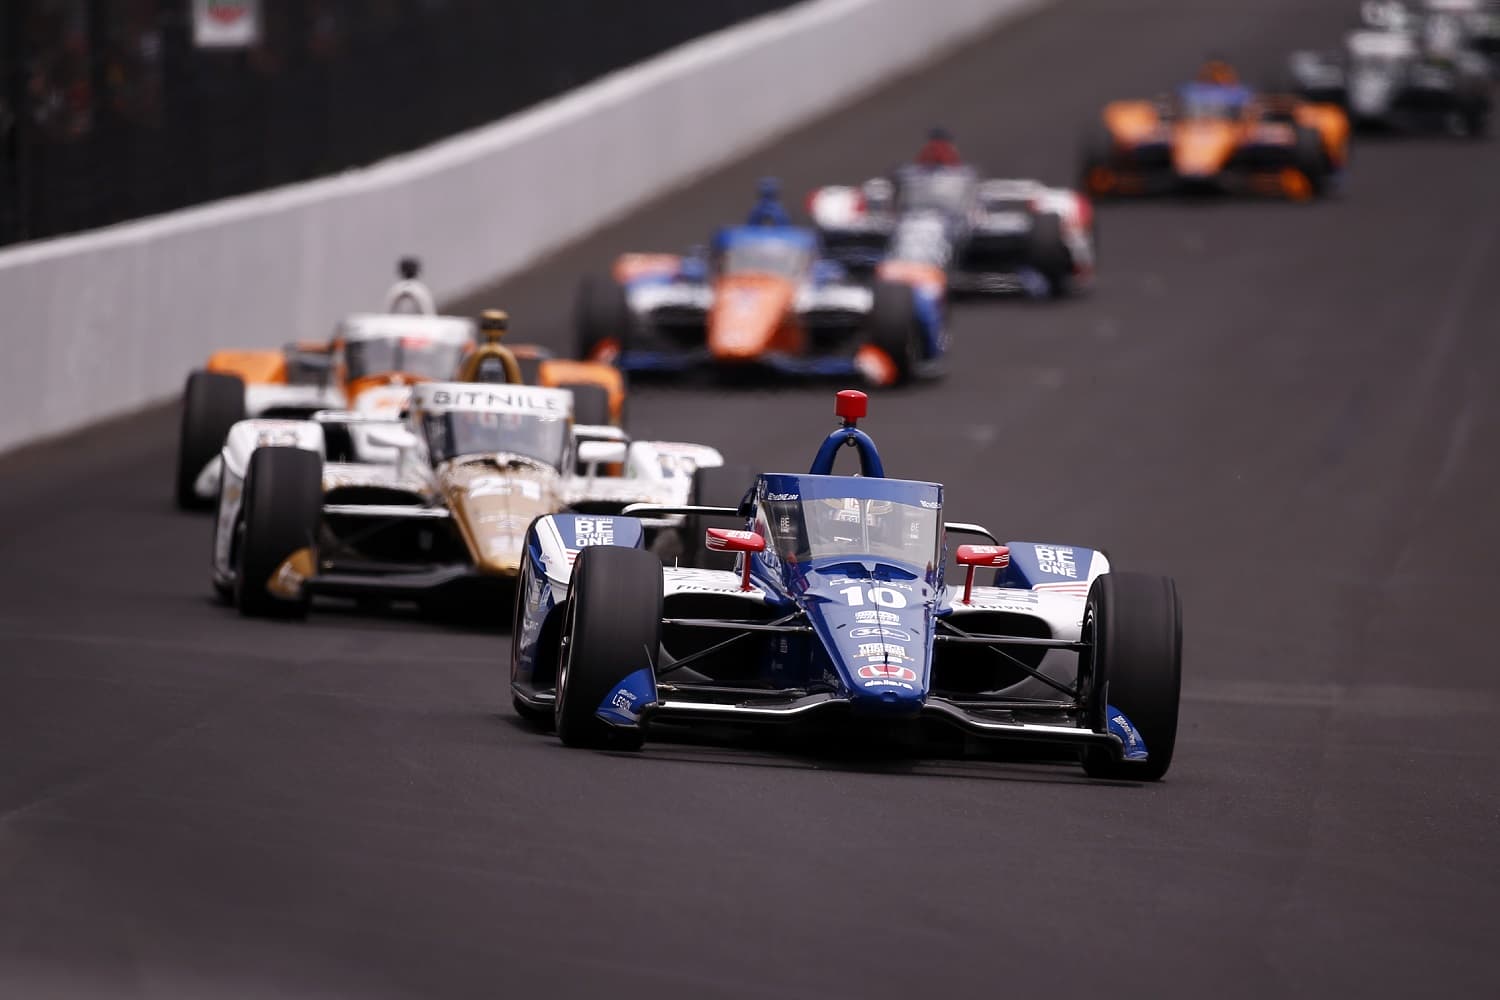 Alex Palou passing Rinus VeeKay during the NTT IndyCar Series Indianapolis 500 on May 28, 2023.